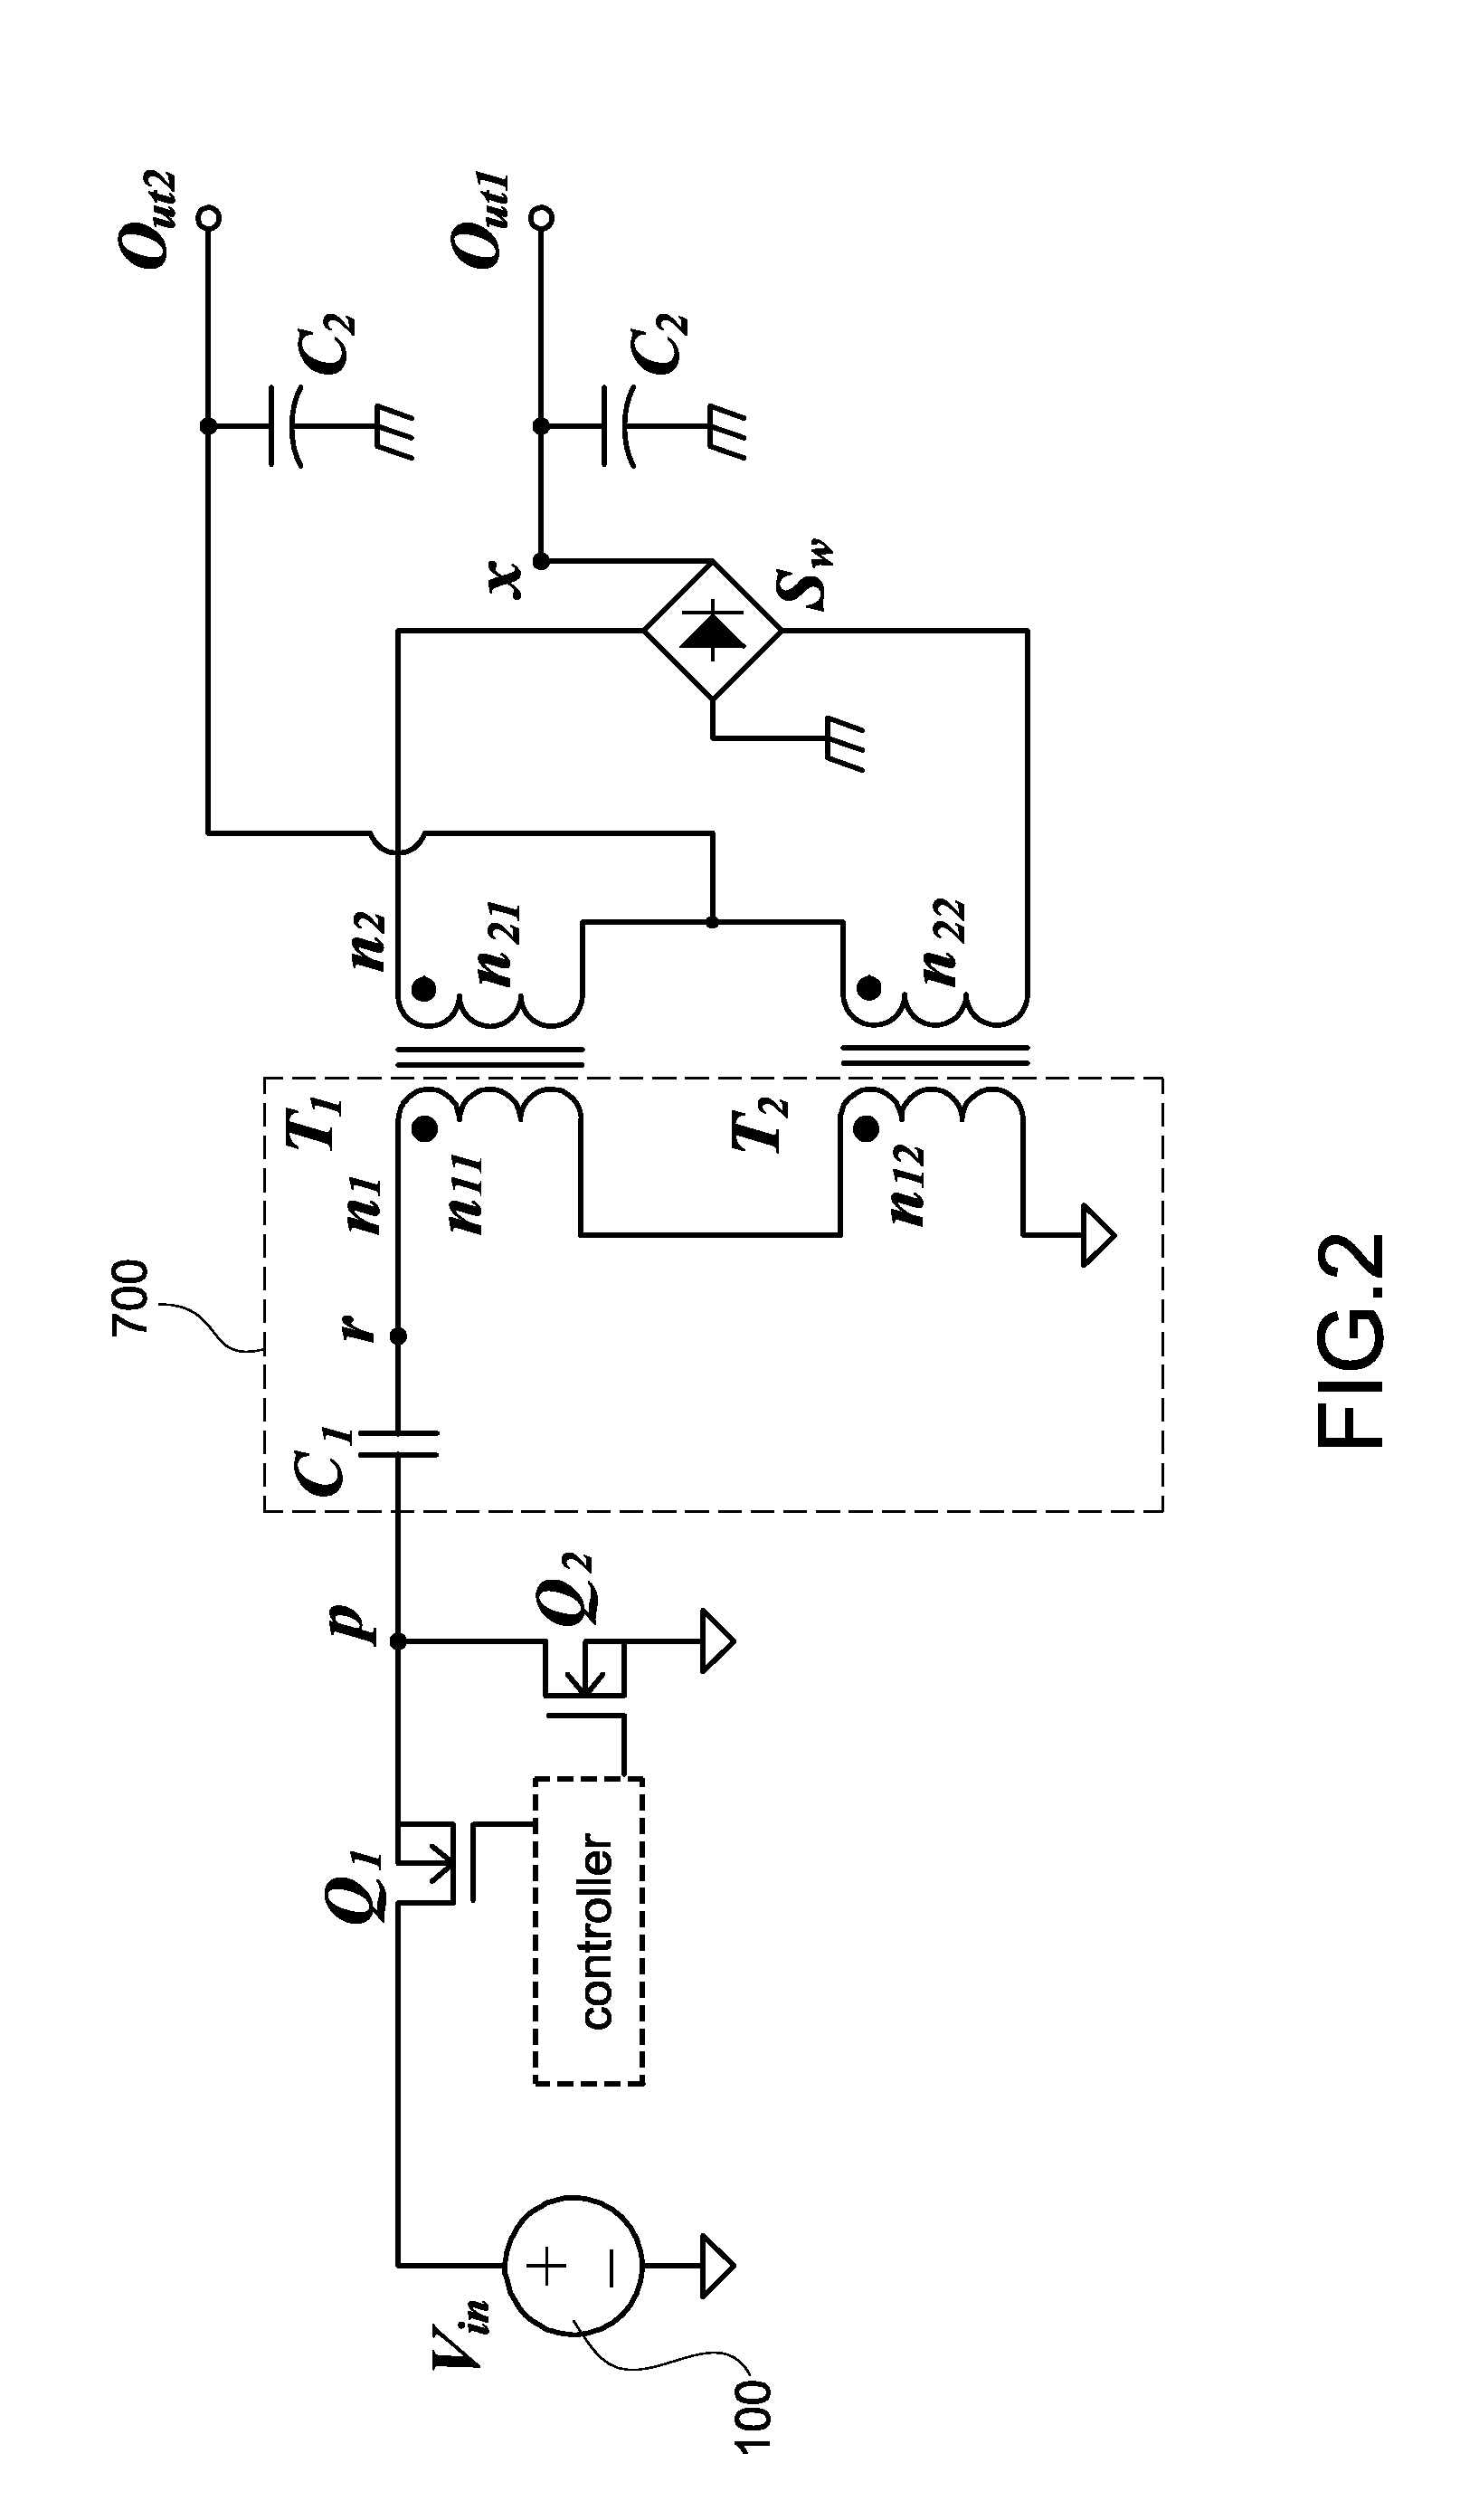 Current-sharing power supply apparatus